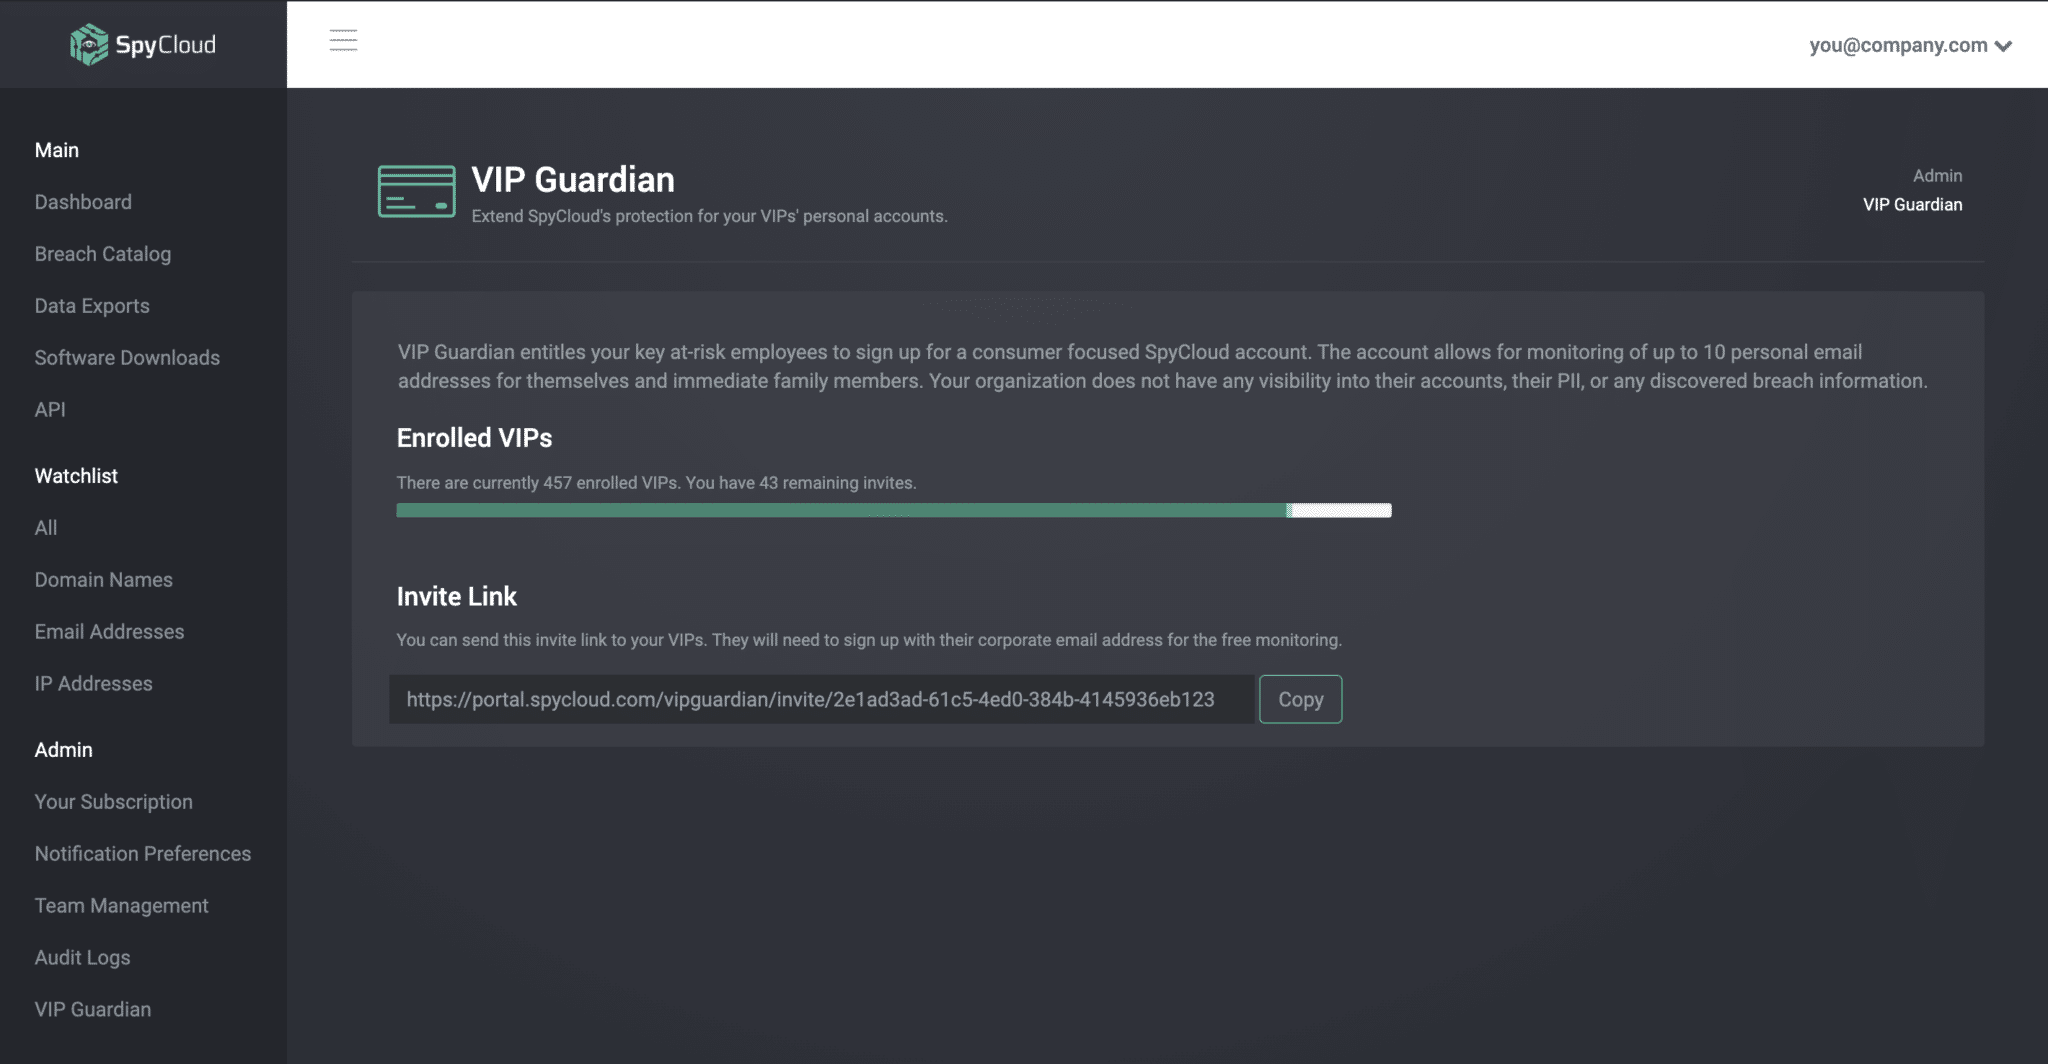 Track how many executives you're protecting with VIP Guardian